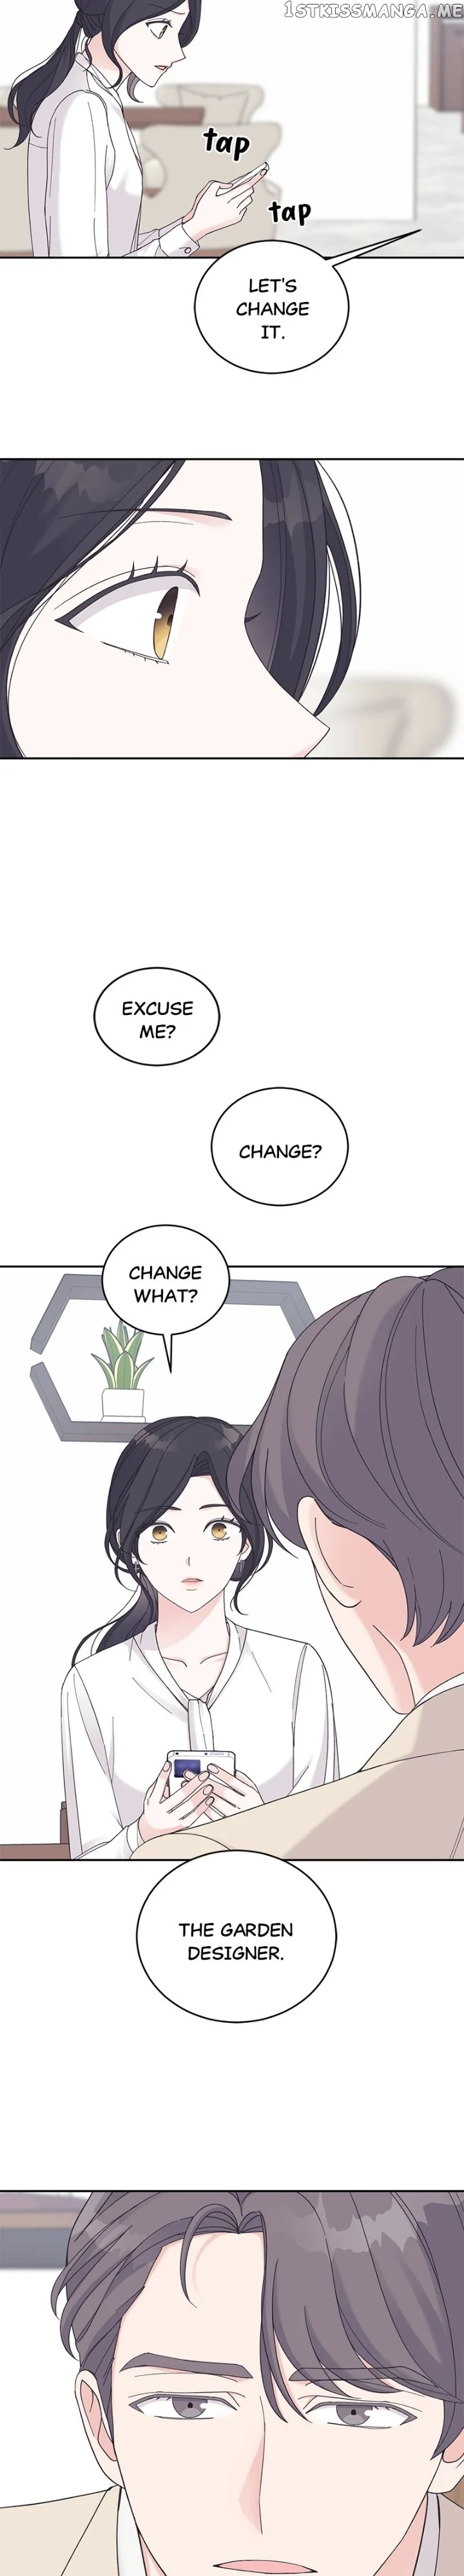 Lend Me Your Lips Chapter 32 - Page 10